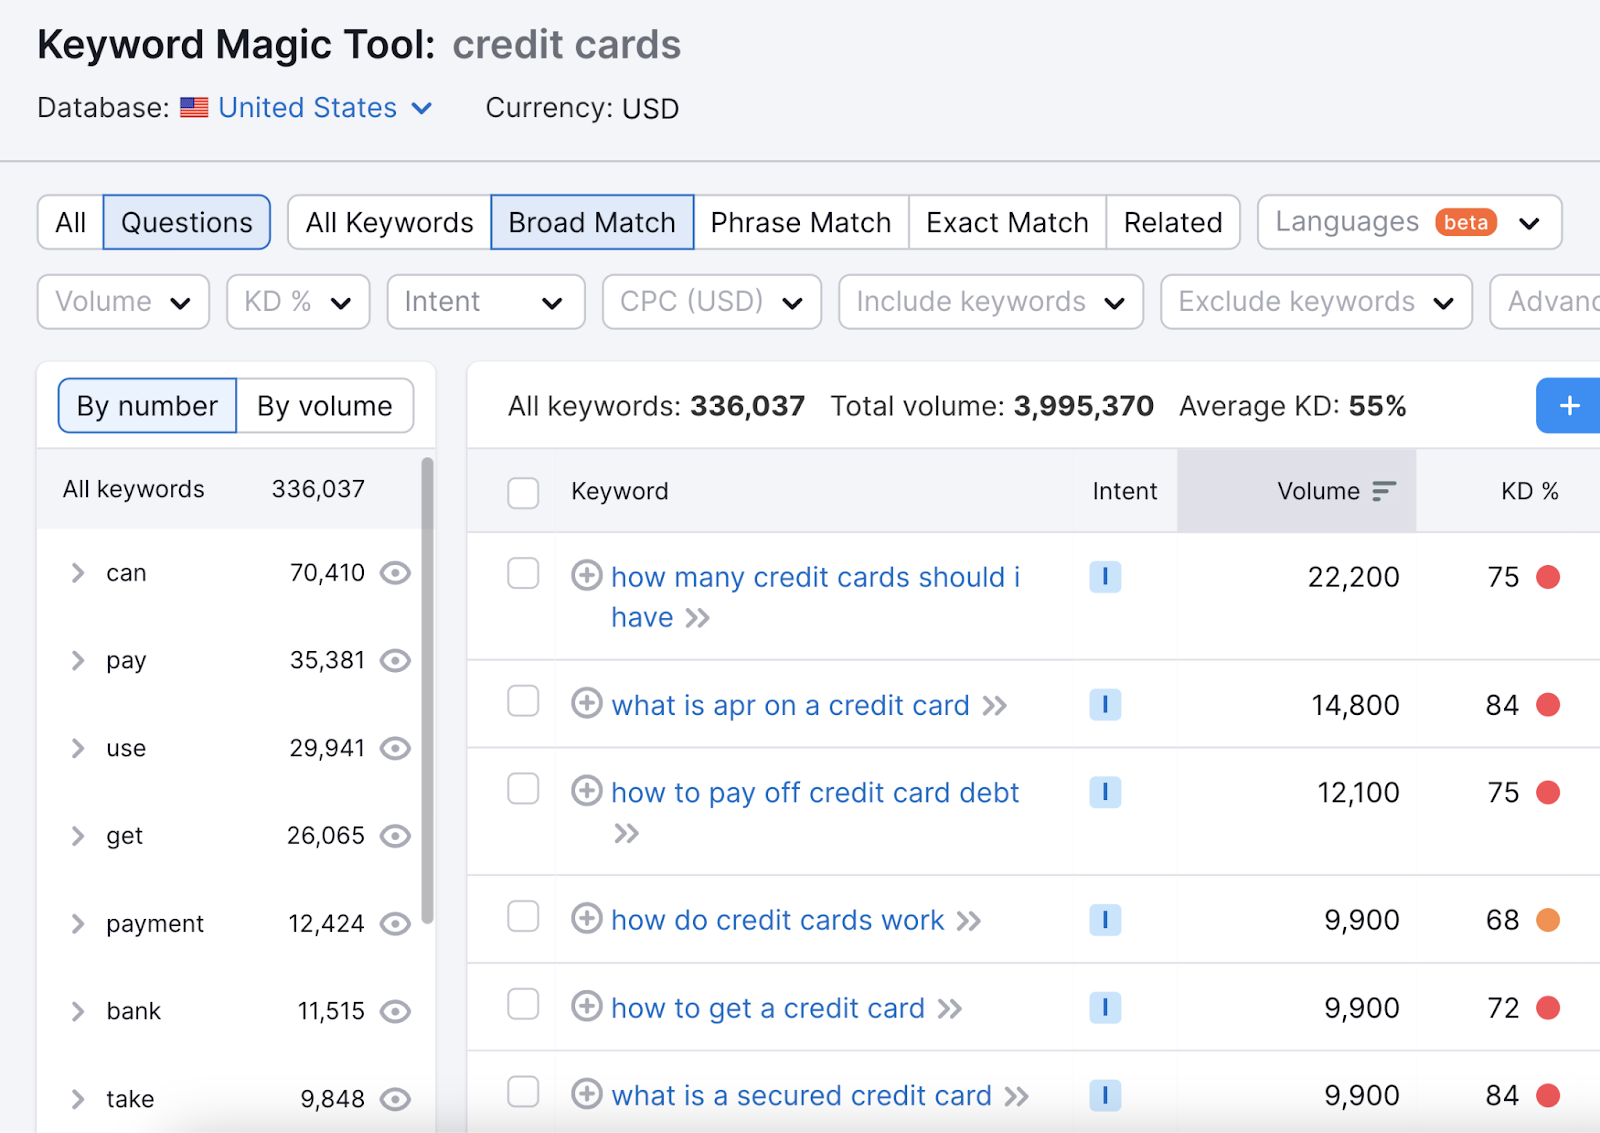 Questions keywords related to "credit card" shown successful  Keyword Magic Tool